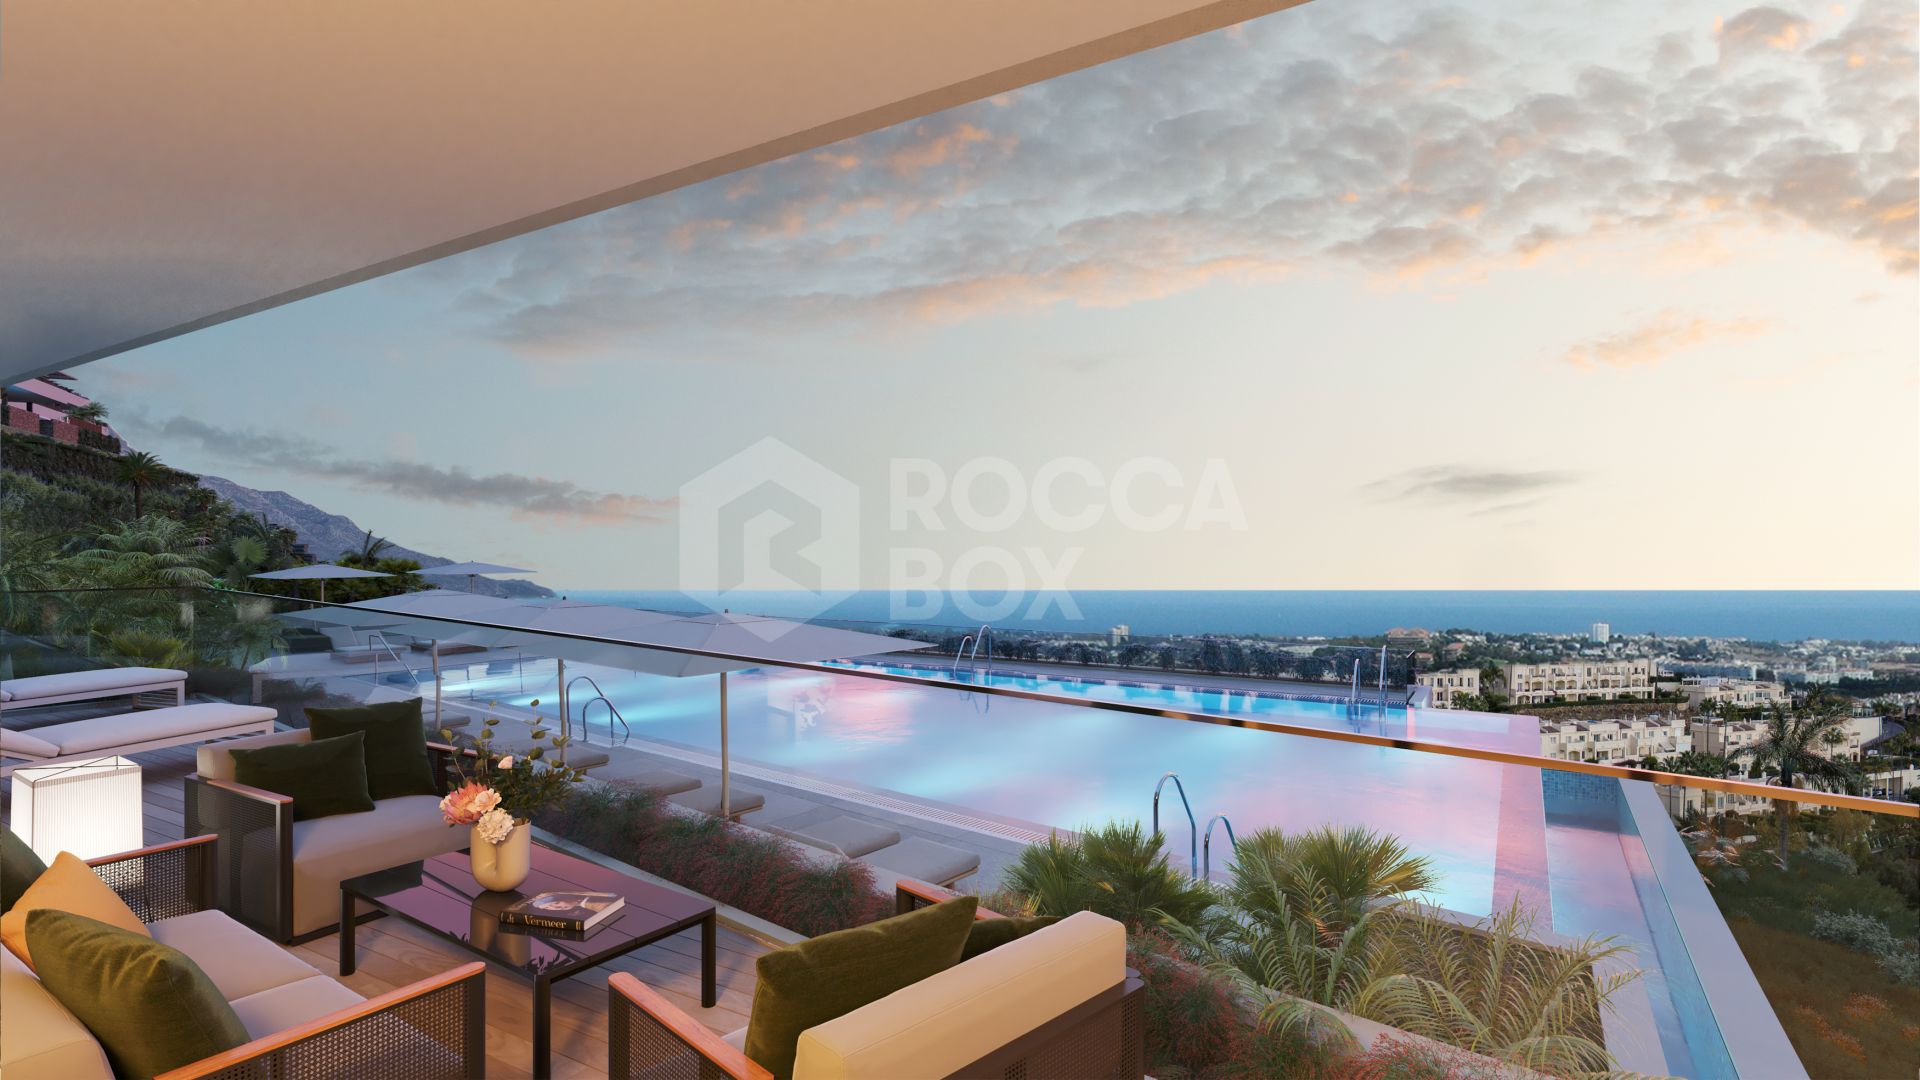 A1512-1 Modern flats and penthouses being built near Benahavis with panoramic views